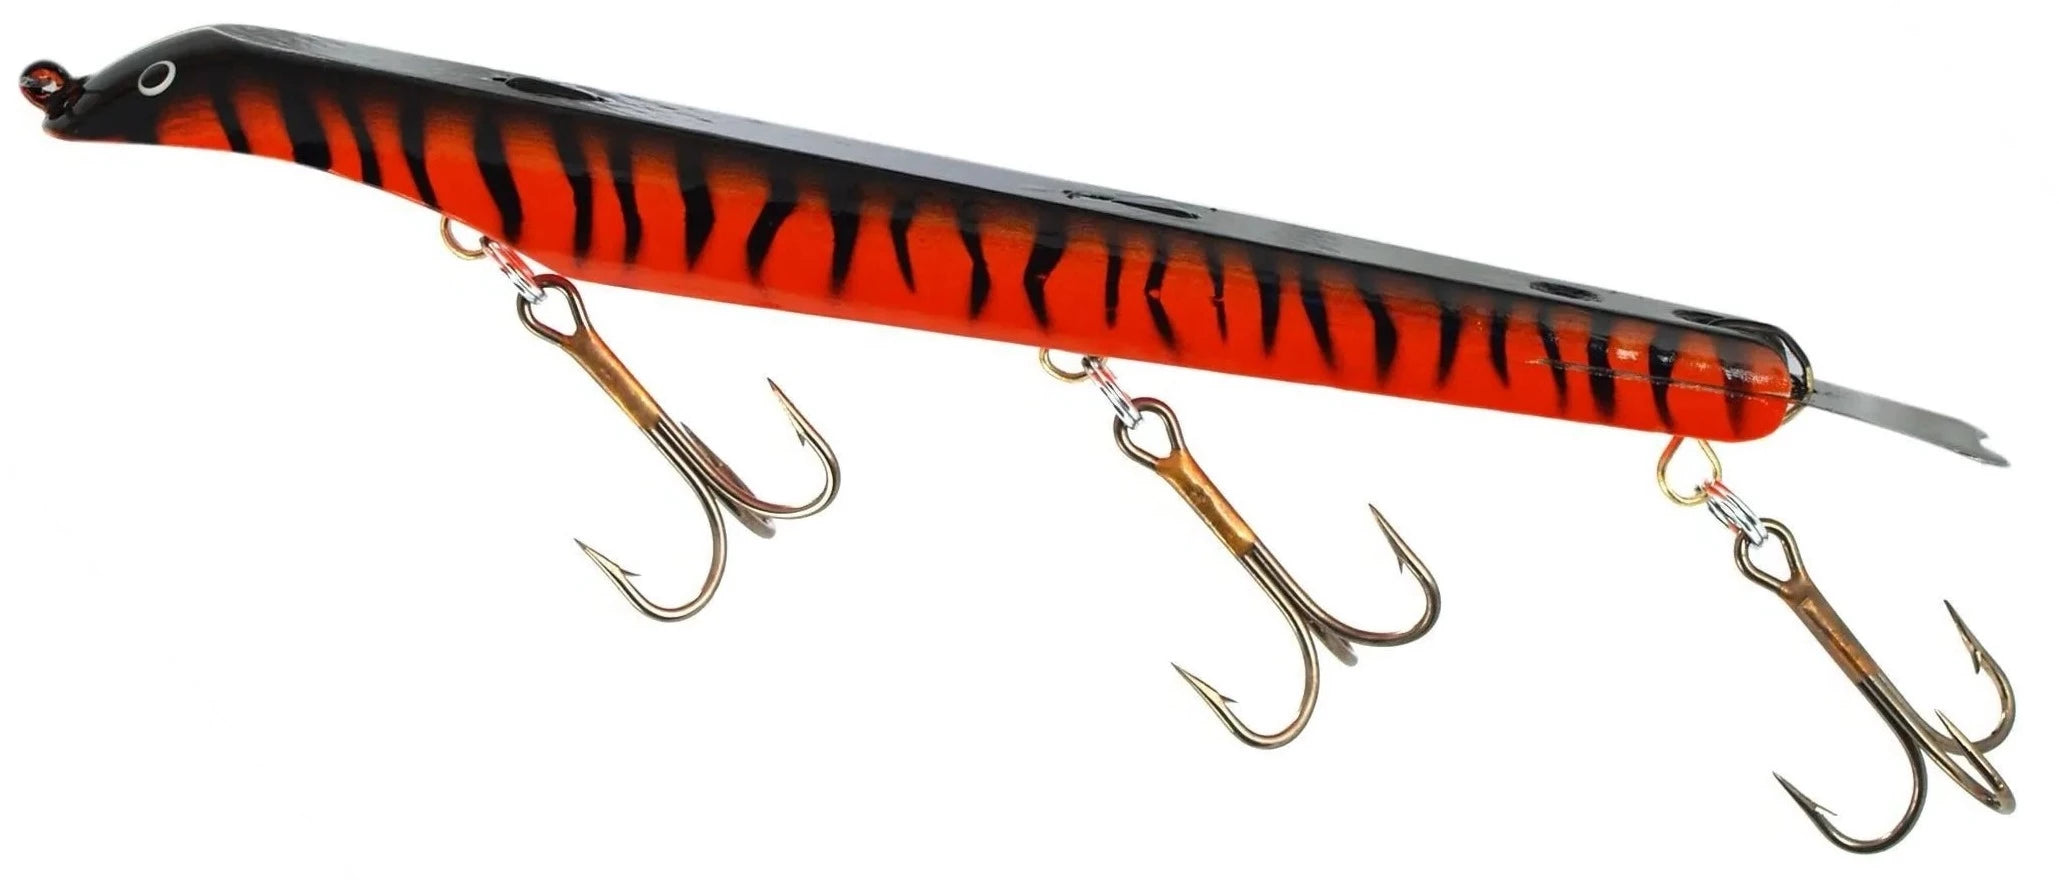 MuskieFIRST  12 Suicks?? » Lures,Tackle, and Equipment » Muskie Fishing